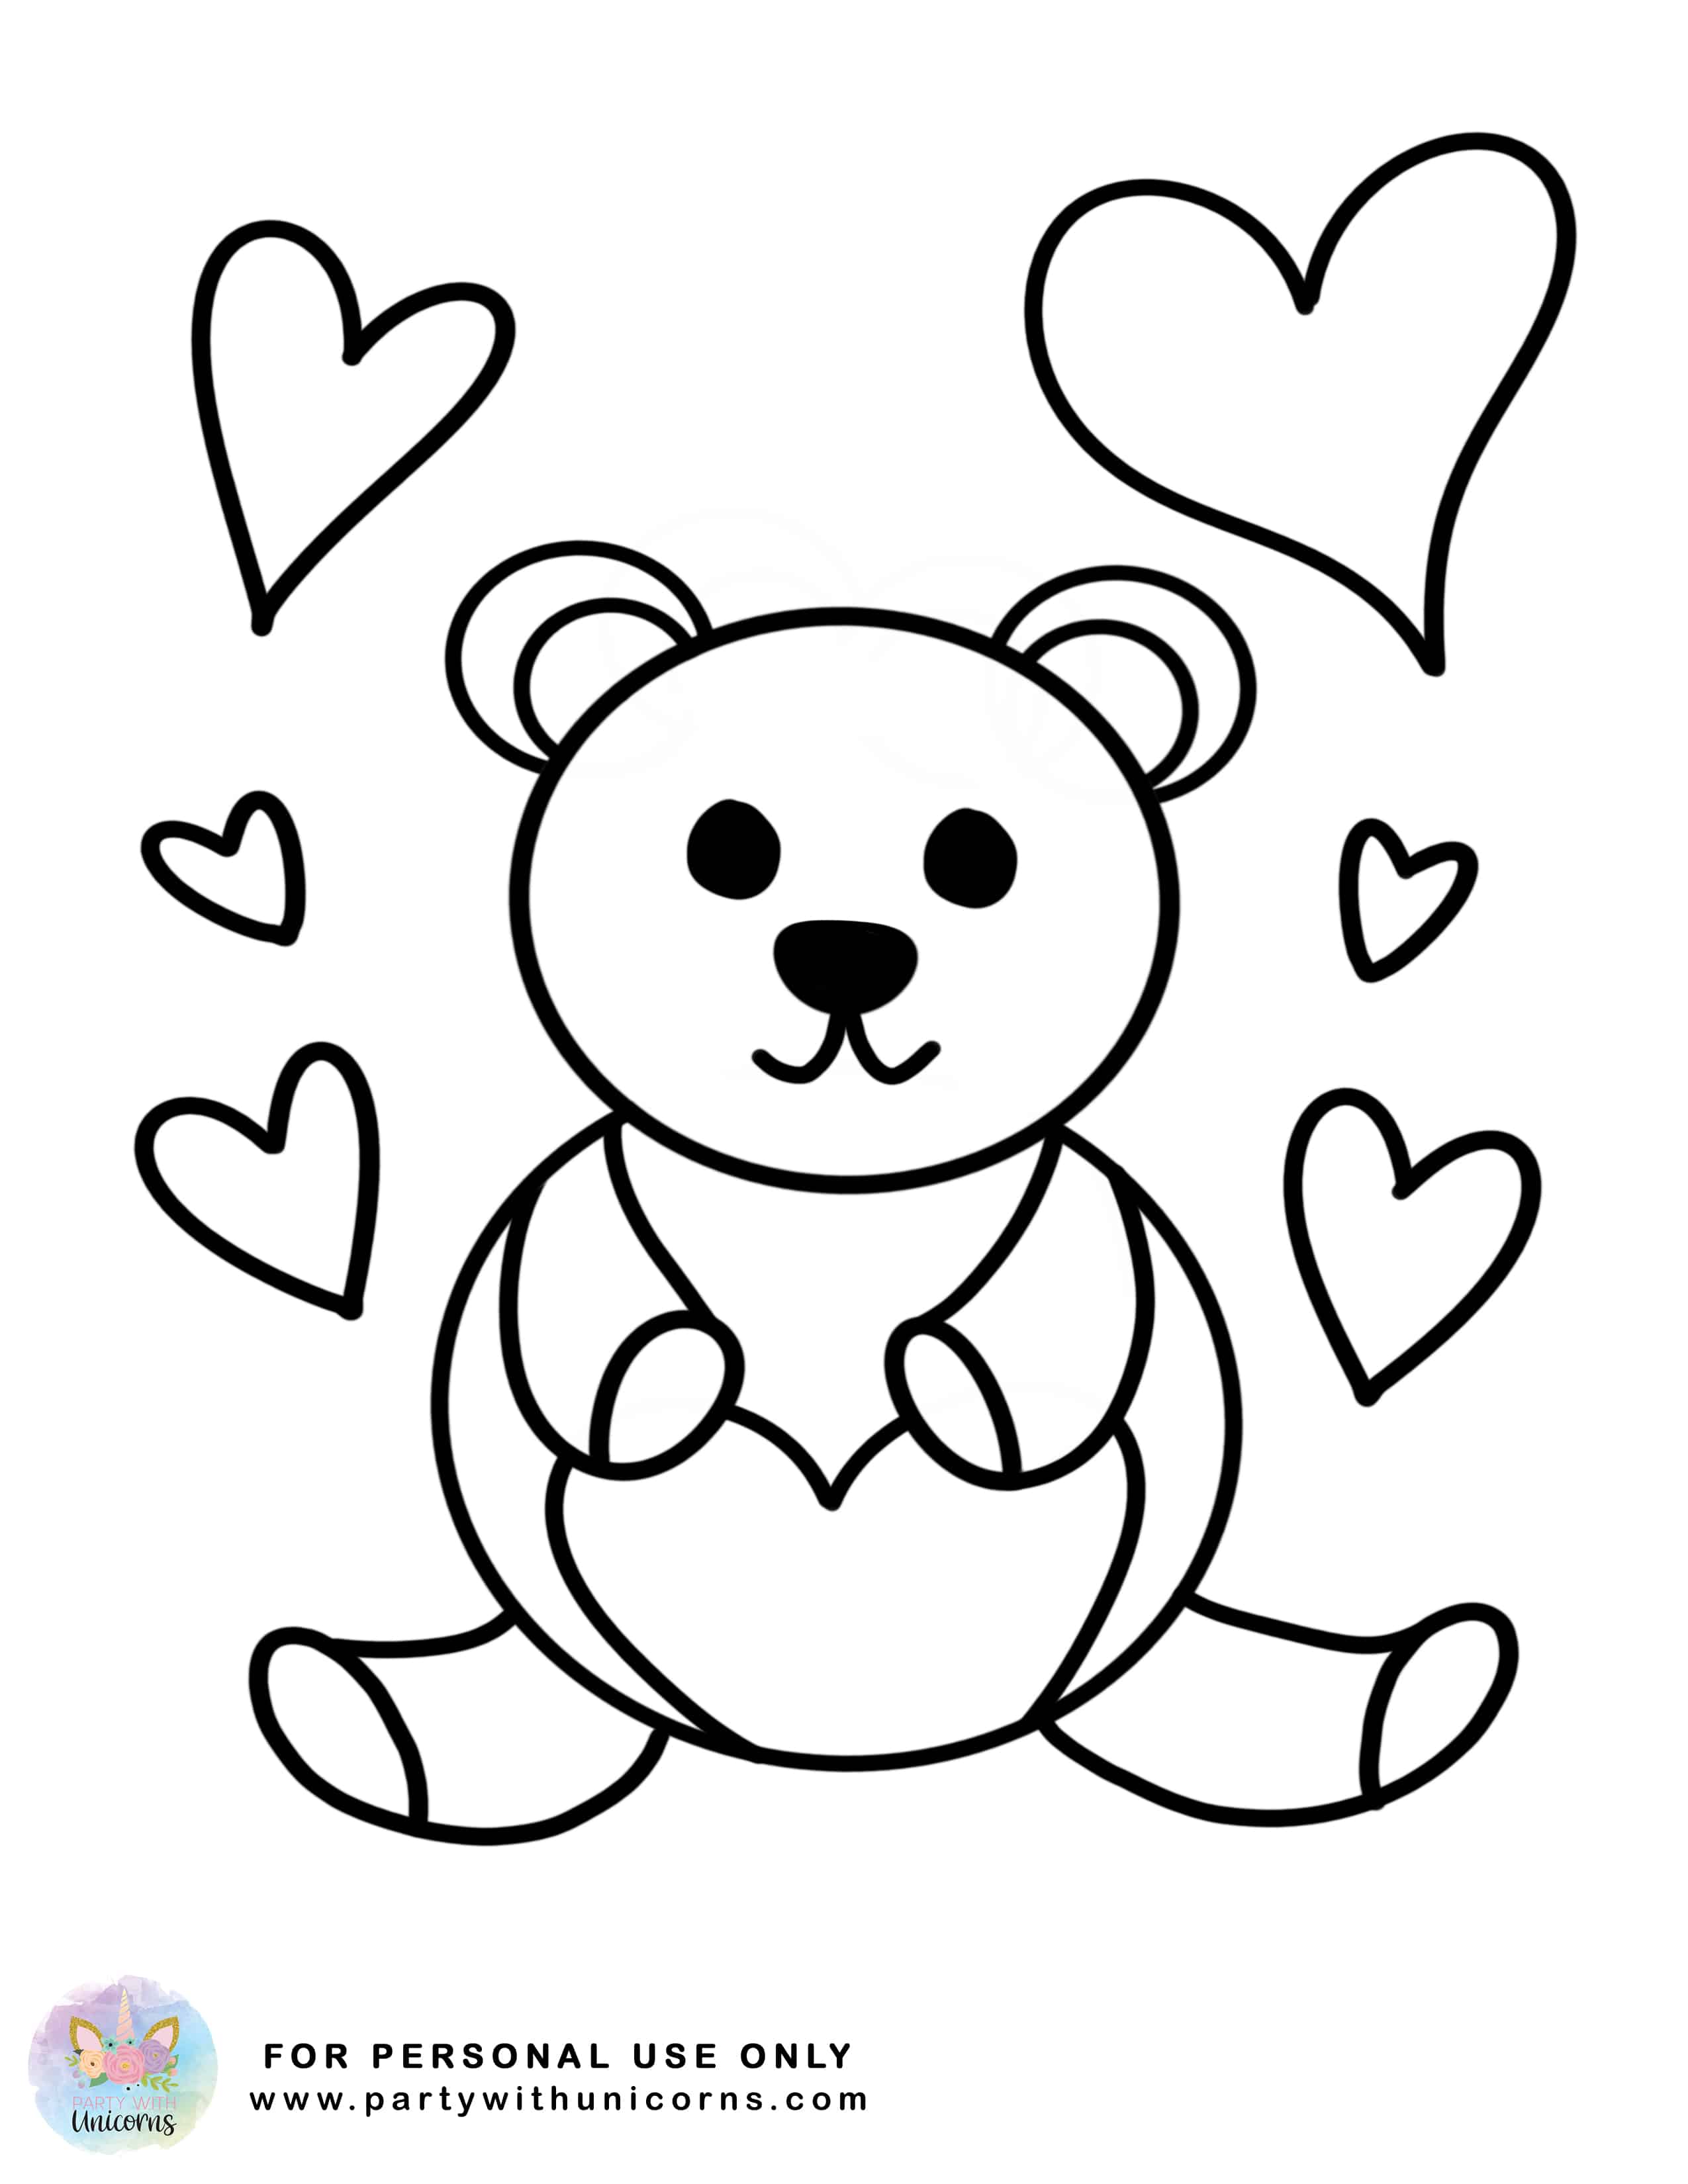 Valentines Coloring Pages   Free Coloring Pages for Kids